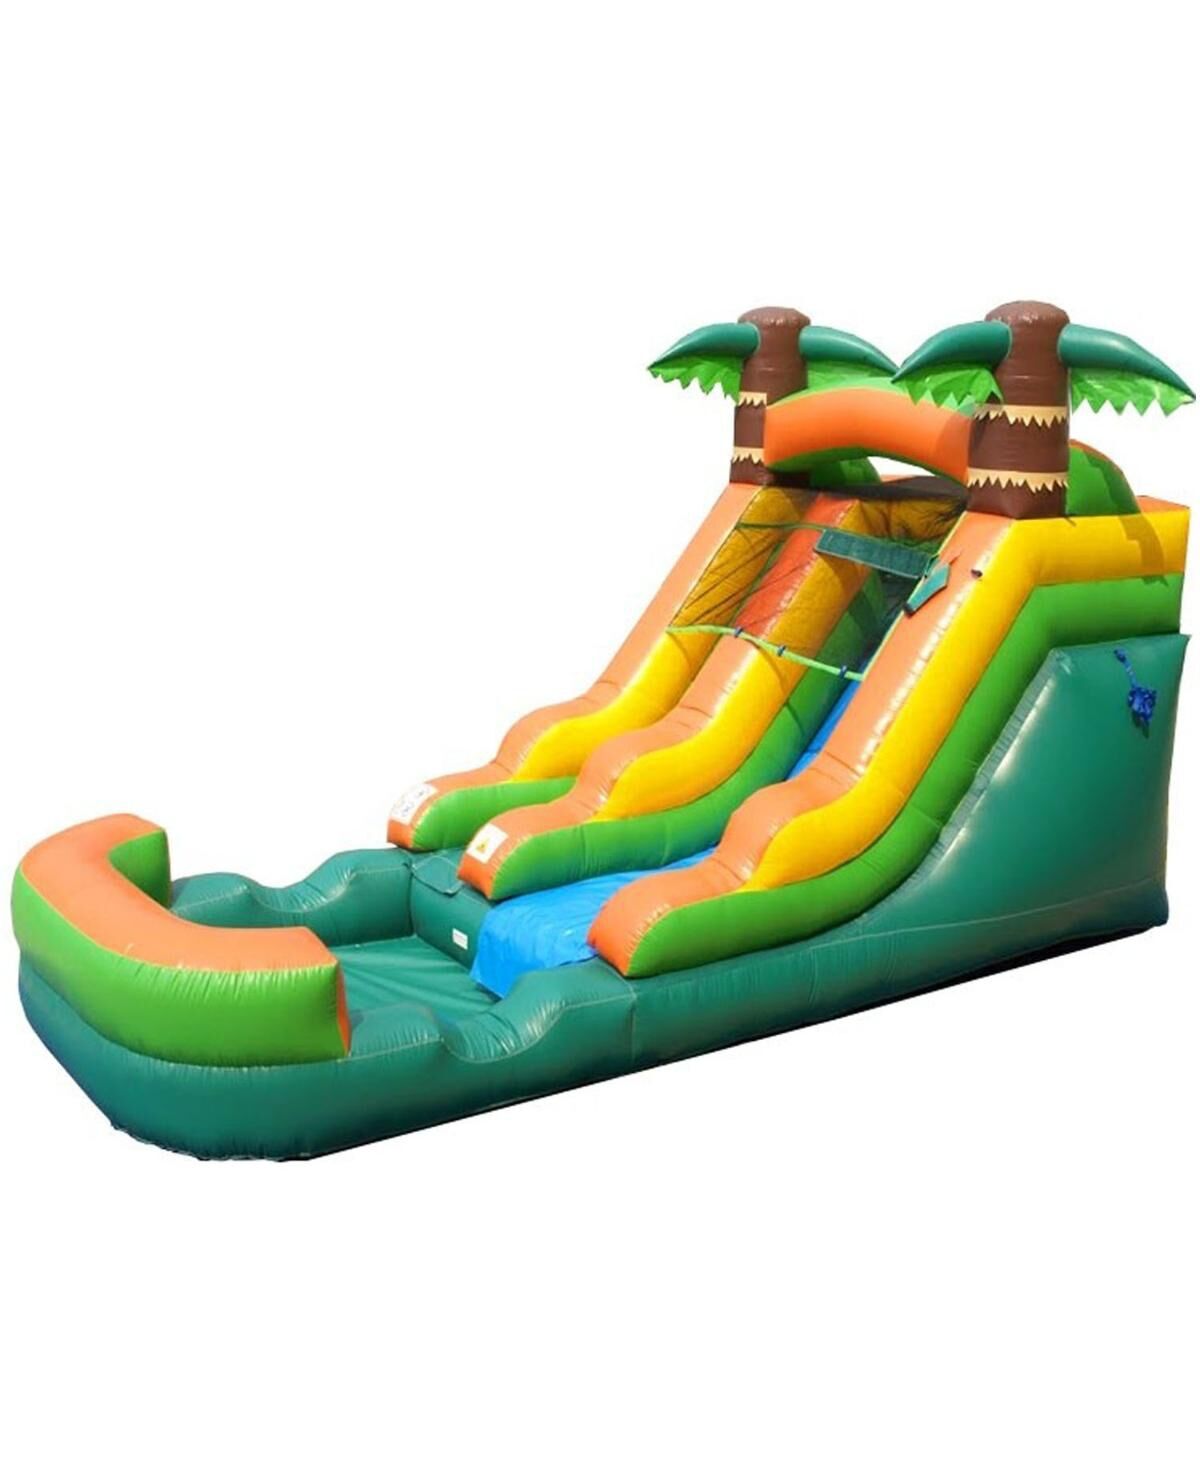 Pogo Bounce House Inflatable Water Slide for Kids (Without Blower) - 21' x 9' x 12' Foot Backyard Inflatable Slide for Summer Fun - Slide with Water P